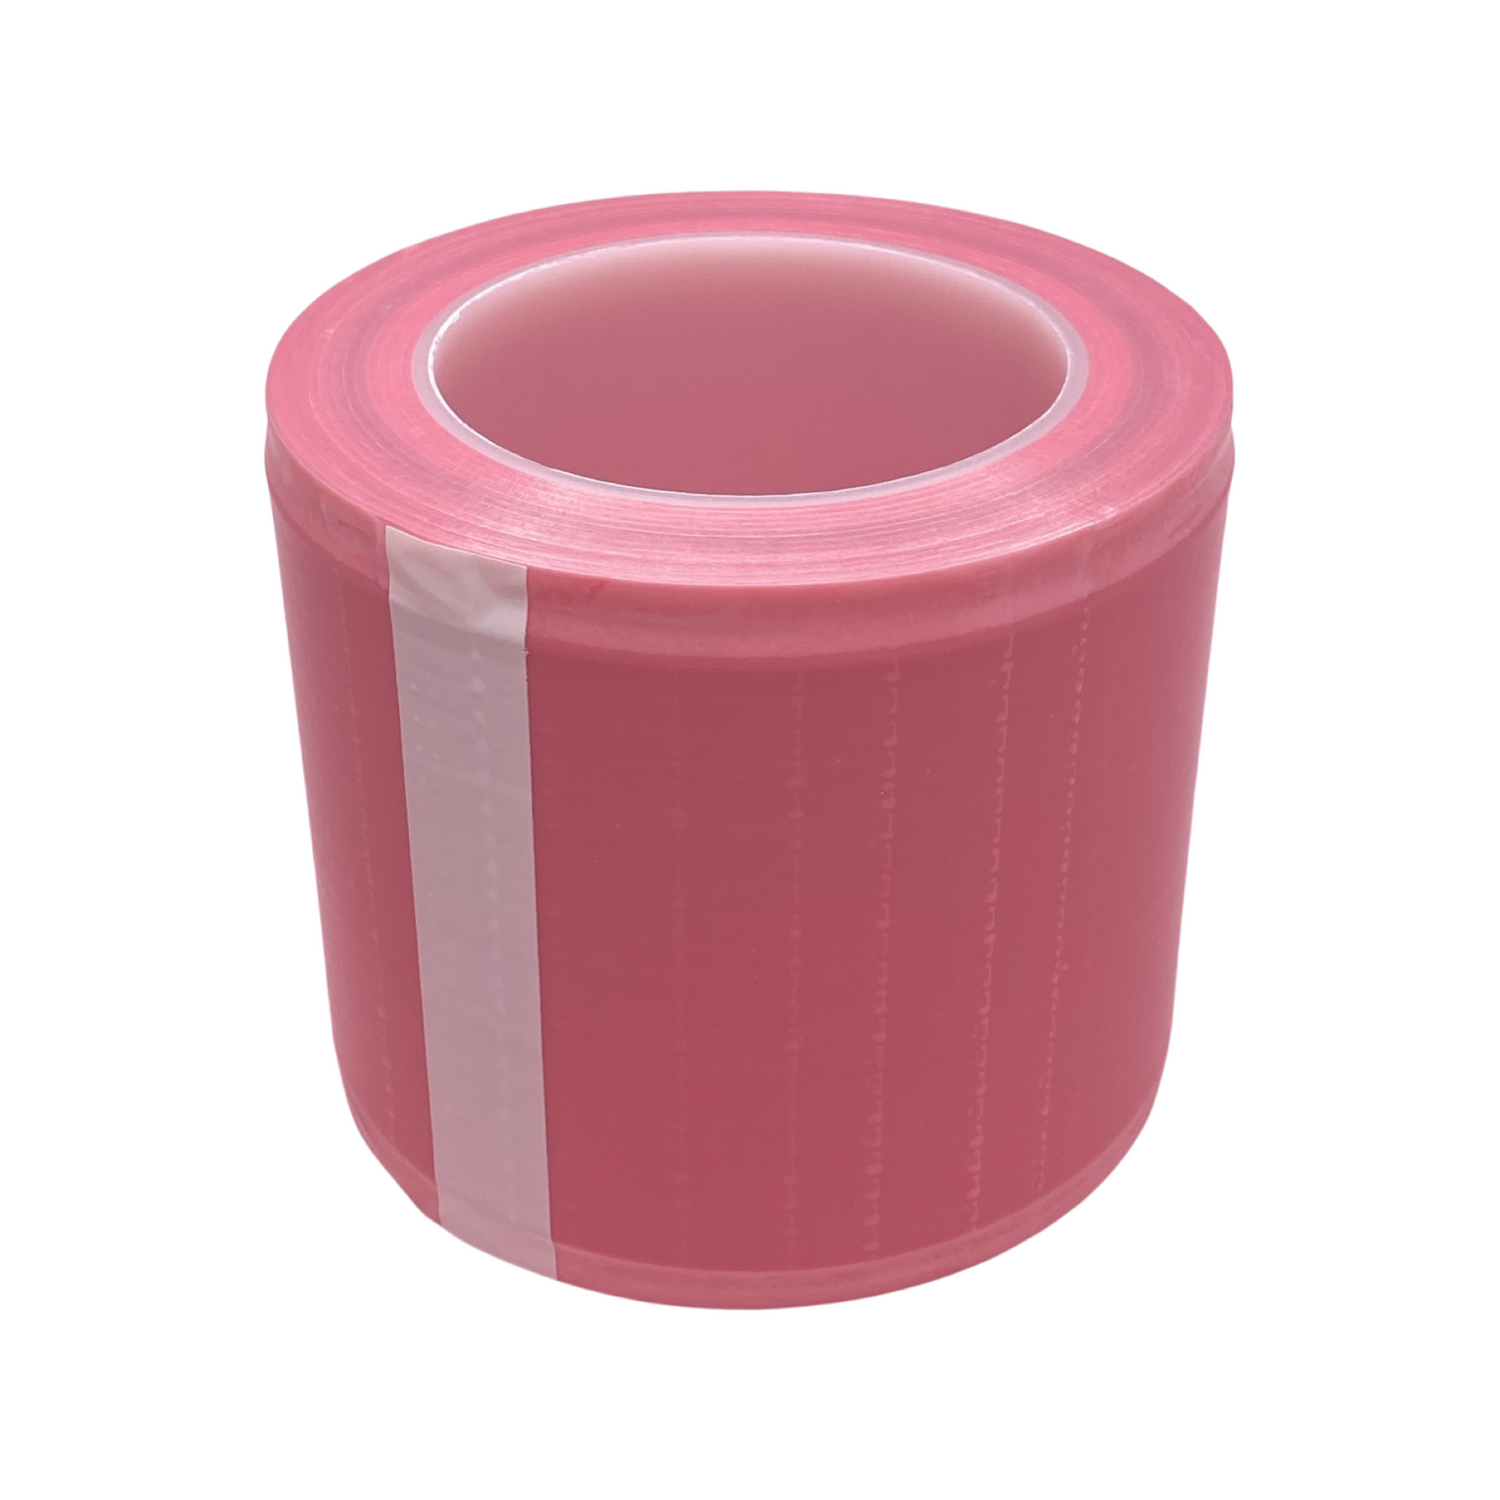 Pink roll of protective barrier film